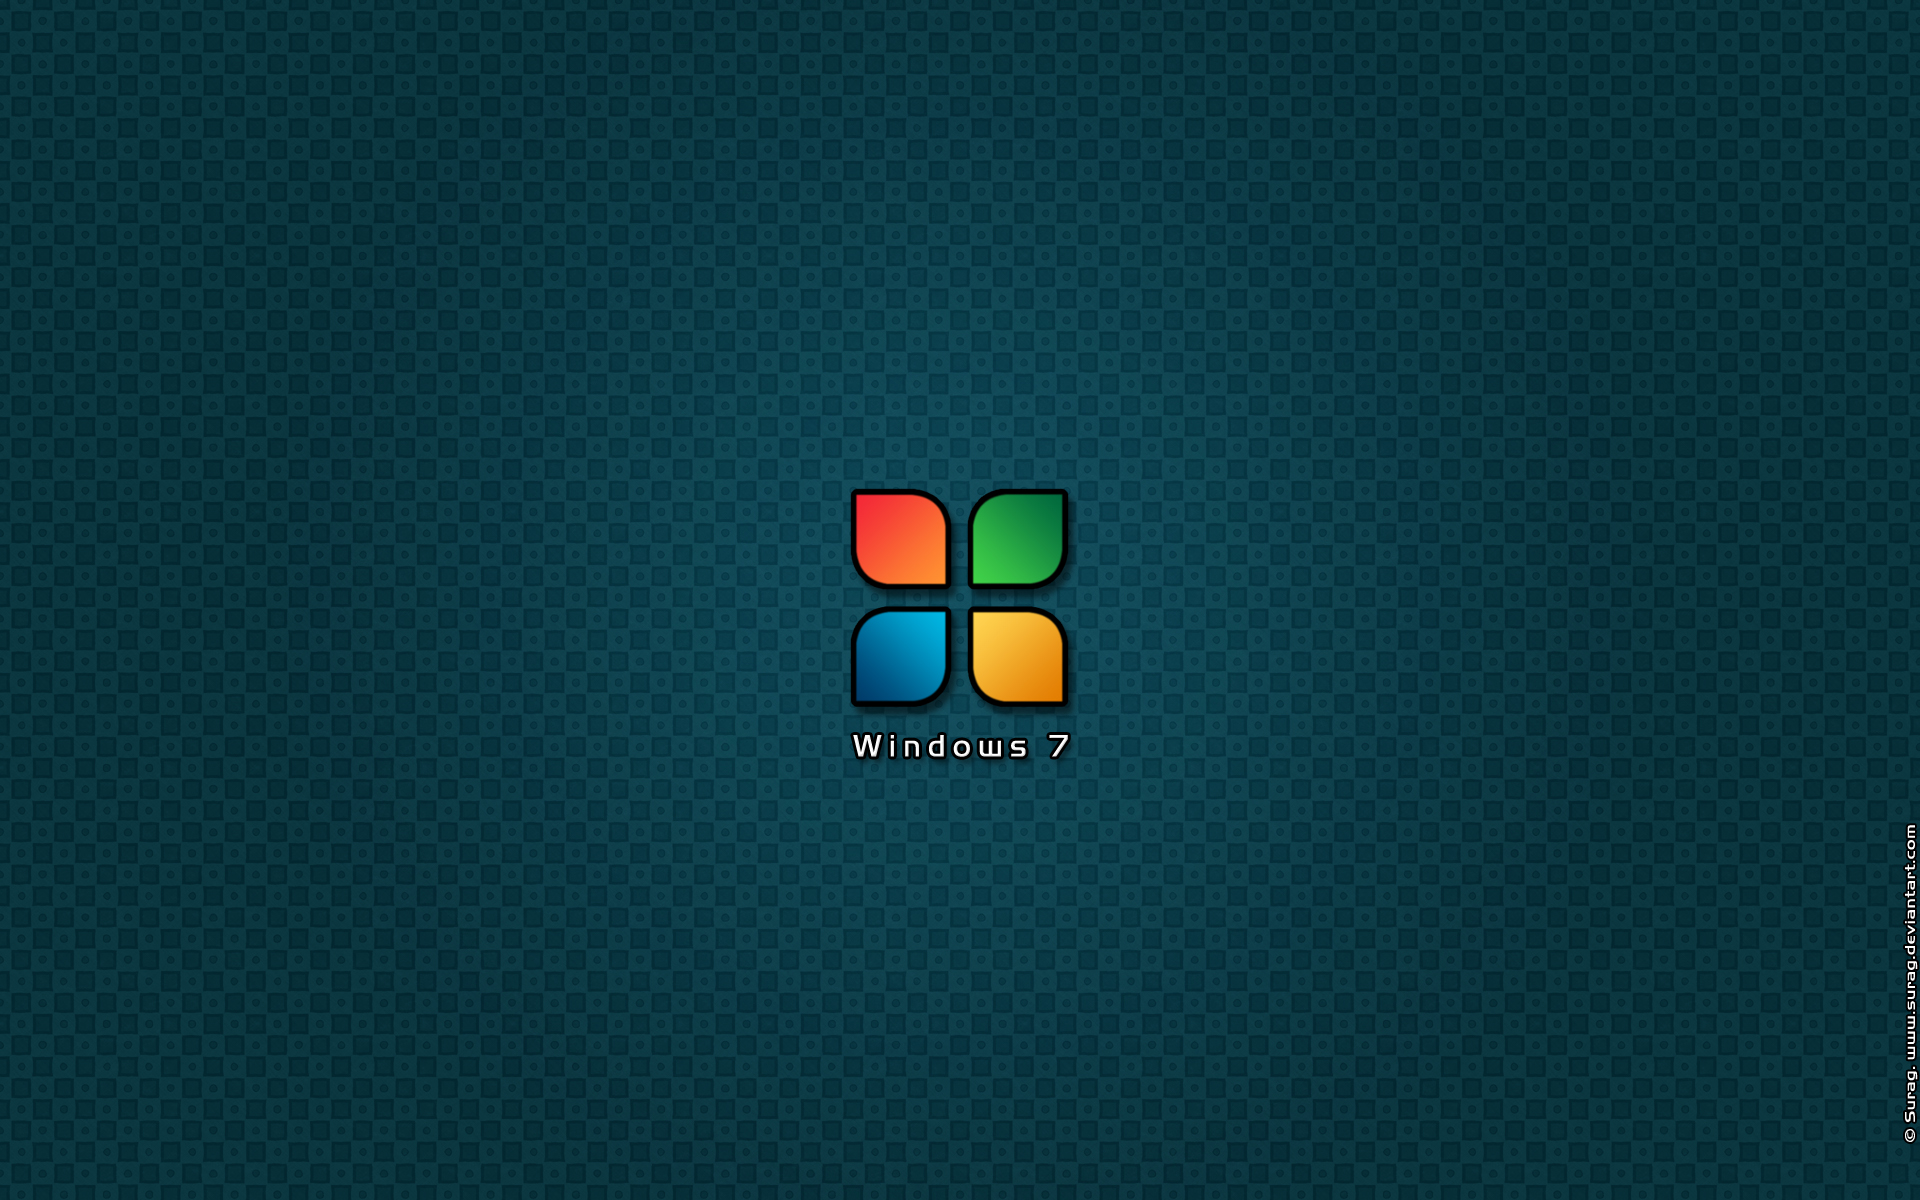 Windows 7 Wallpapers, Pictures, Images